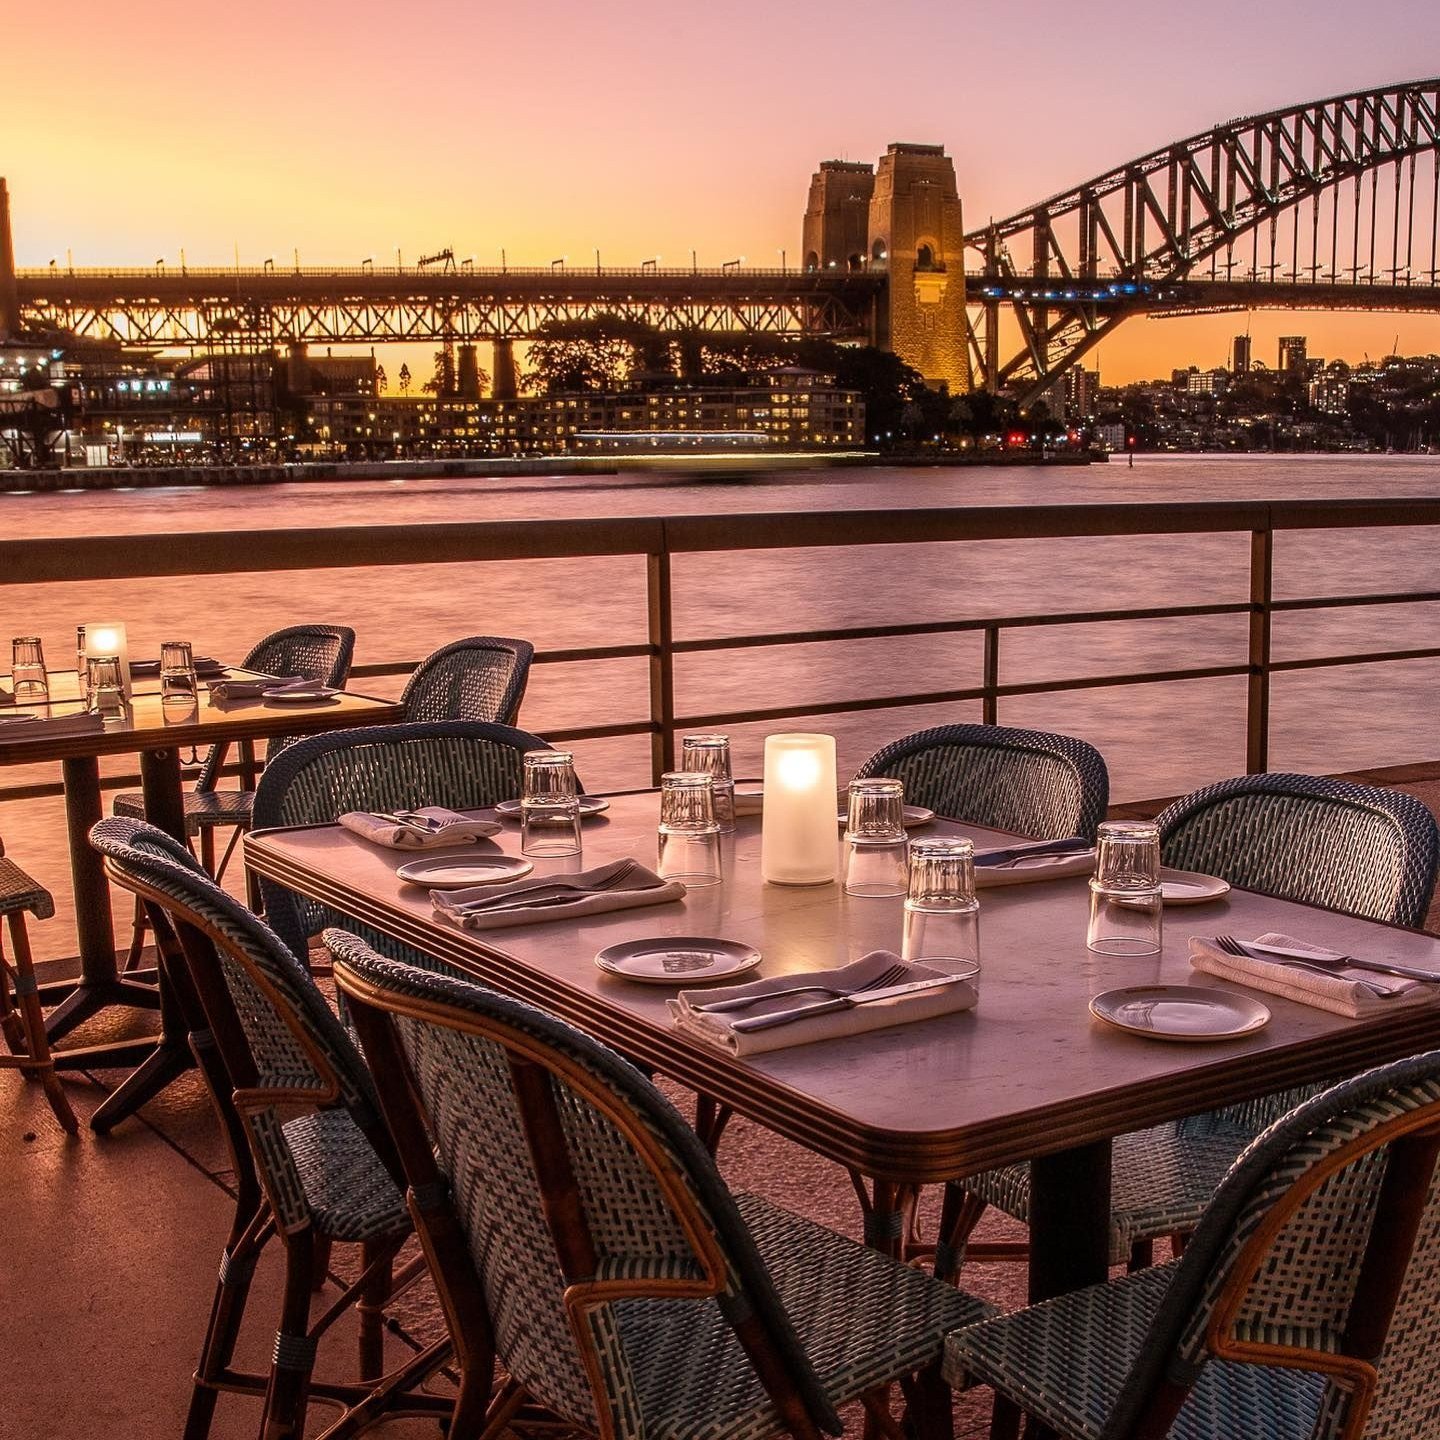 With a sideways glance at Sydney Opera House and eye-to-eye with the Harbour Bridge, our deliciously French bistro &amp; bar is poised perfectly on the water&rsquo;s edge.

Bookings and menu via the link in bio.

#whalebridge